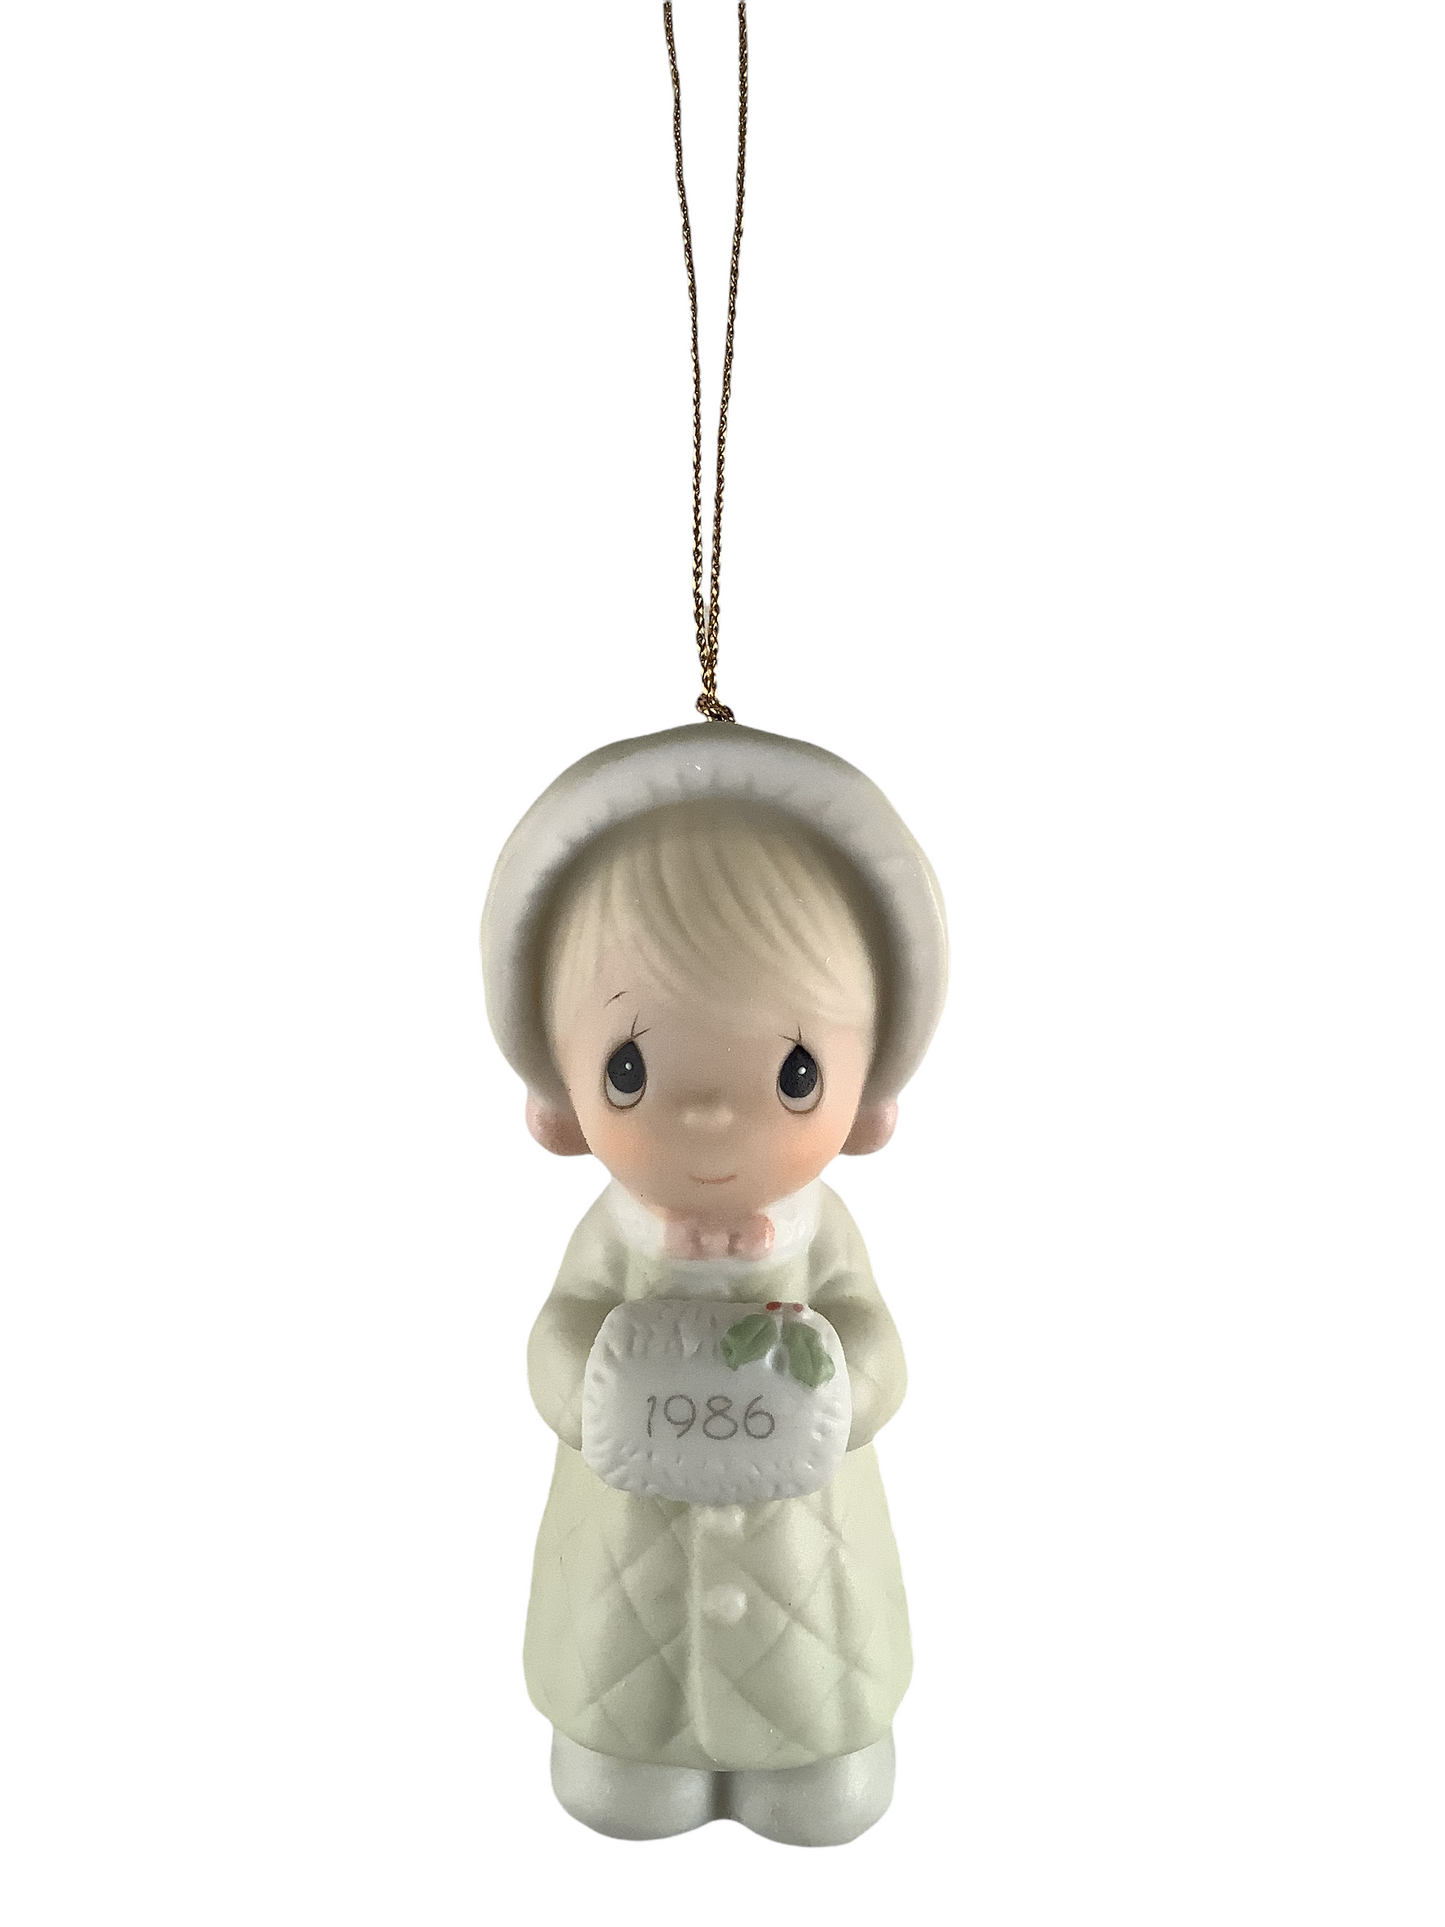 Wishing You A Cozy Christmas - 1986 Dated Annual Precious Moment Ornament